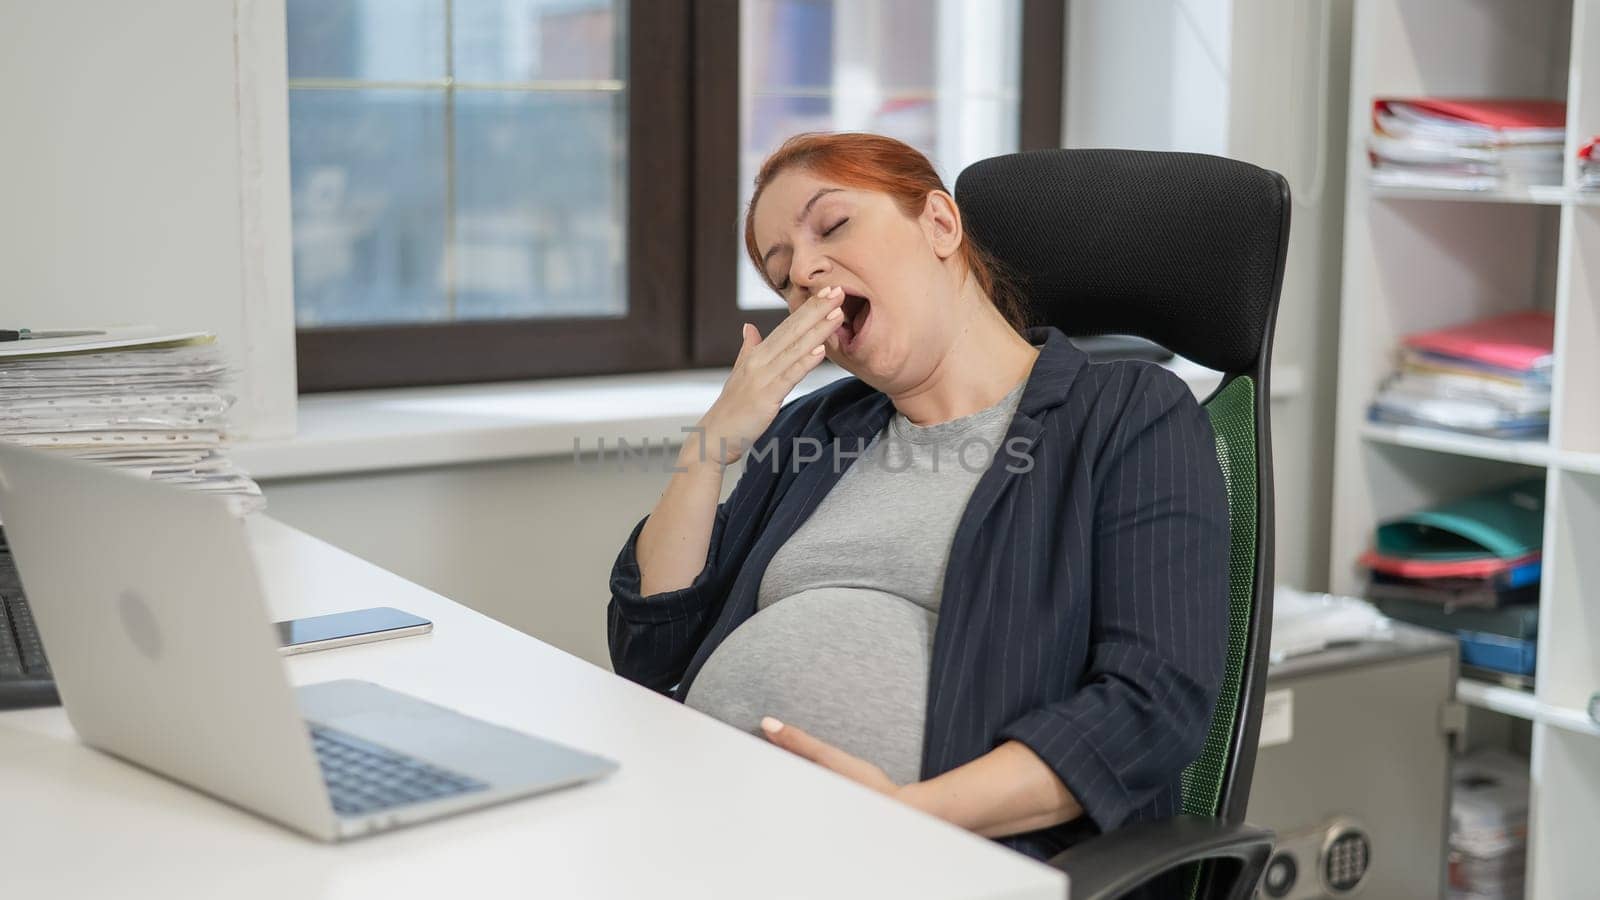 Pregnant woman sleeping at her desk in the office. by mrwed54